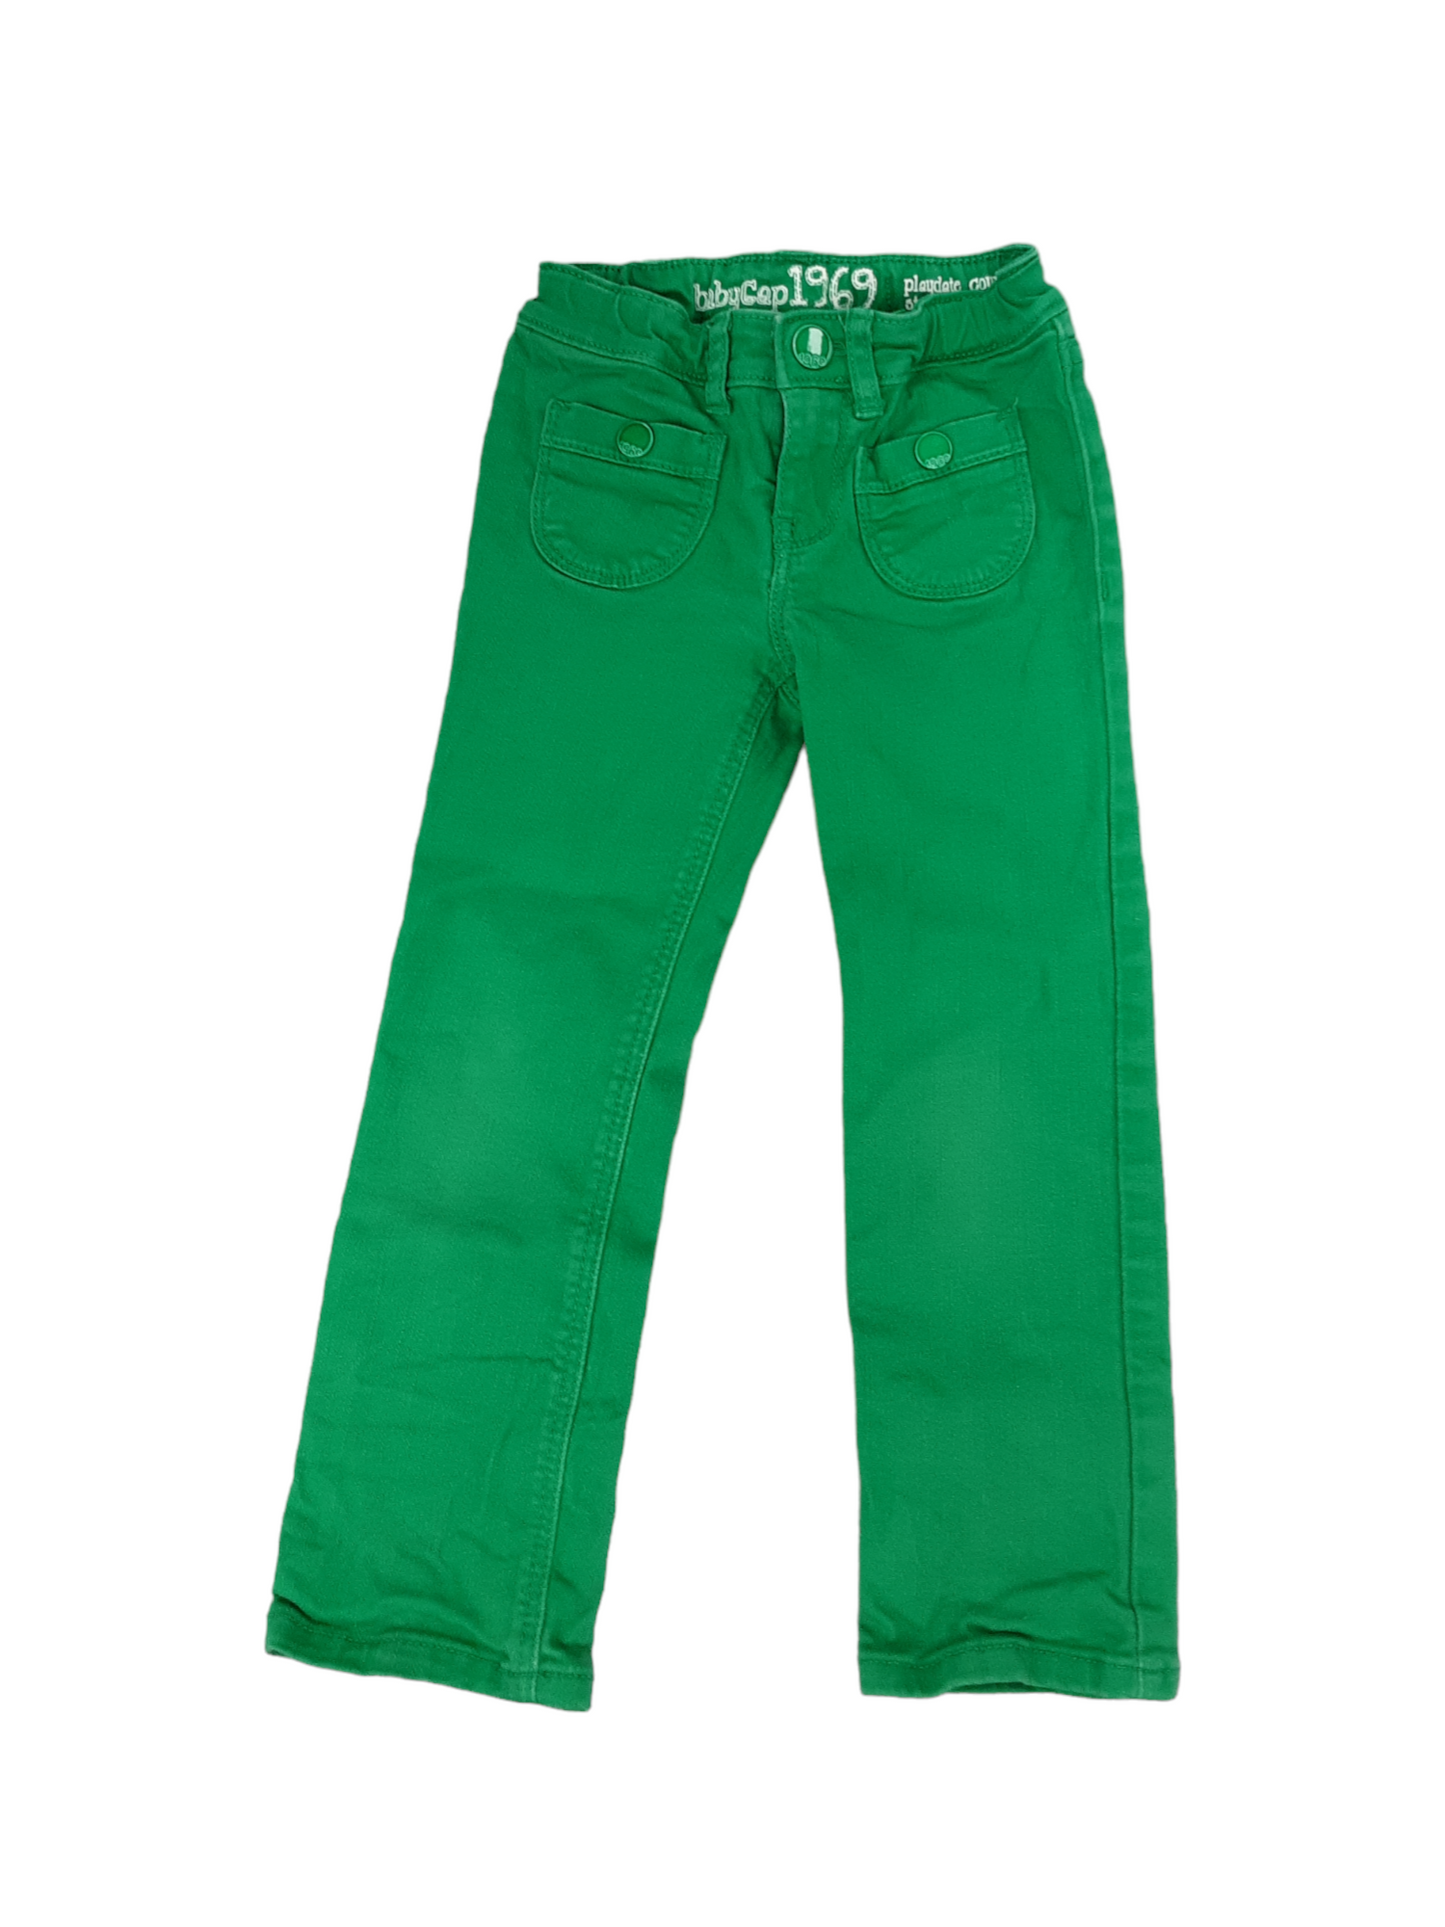 Lime green jeans size 4